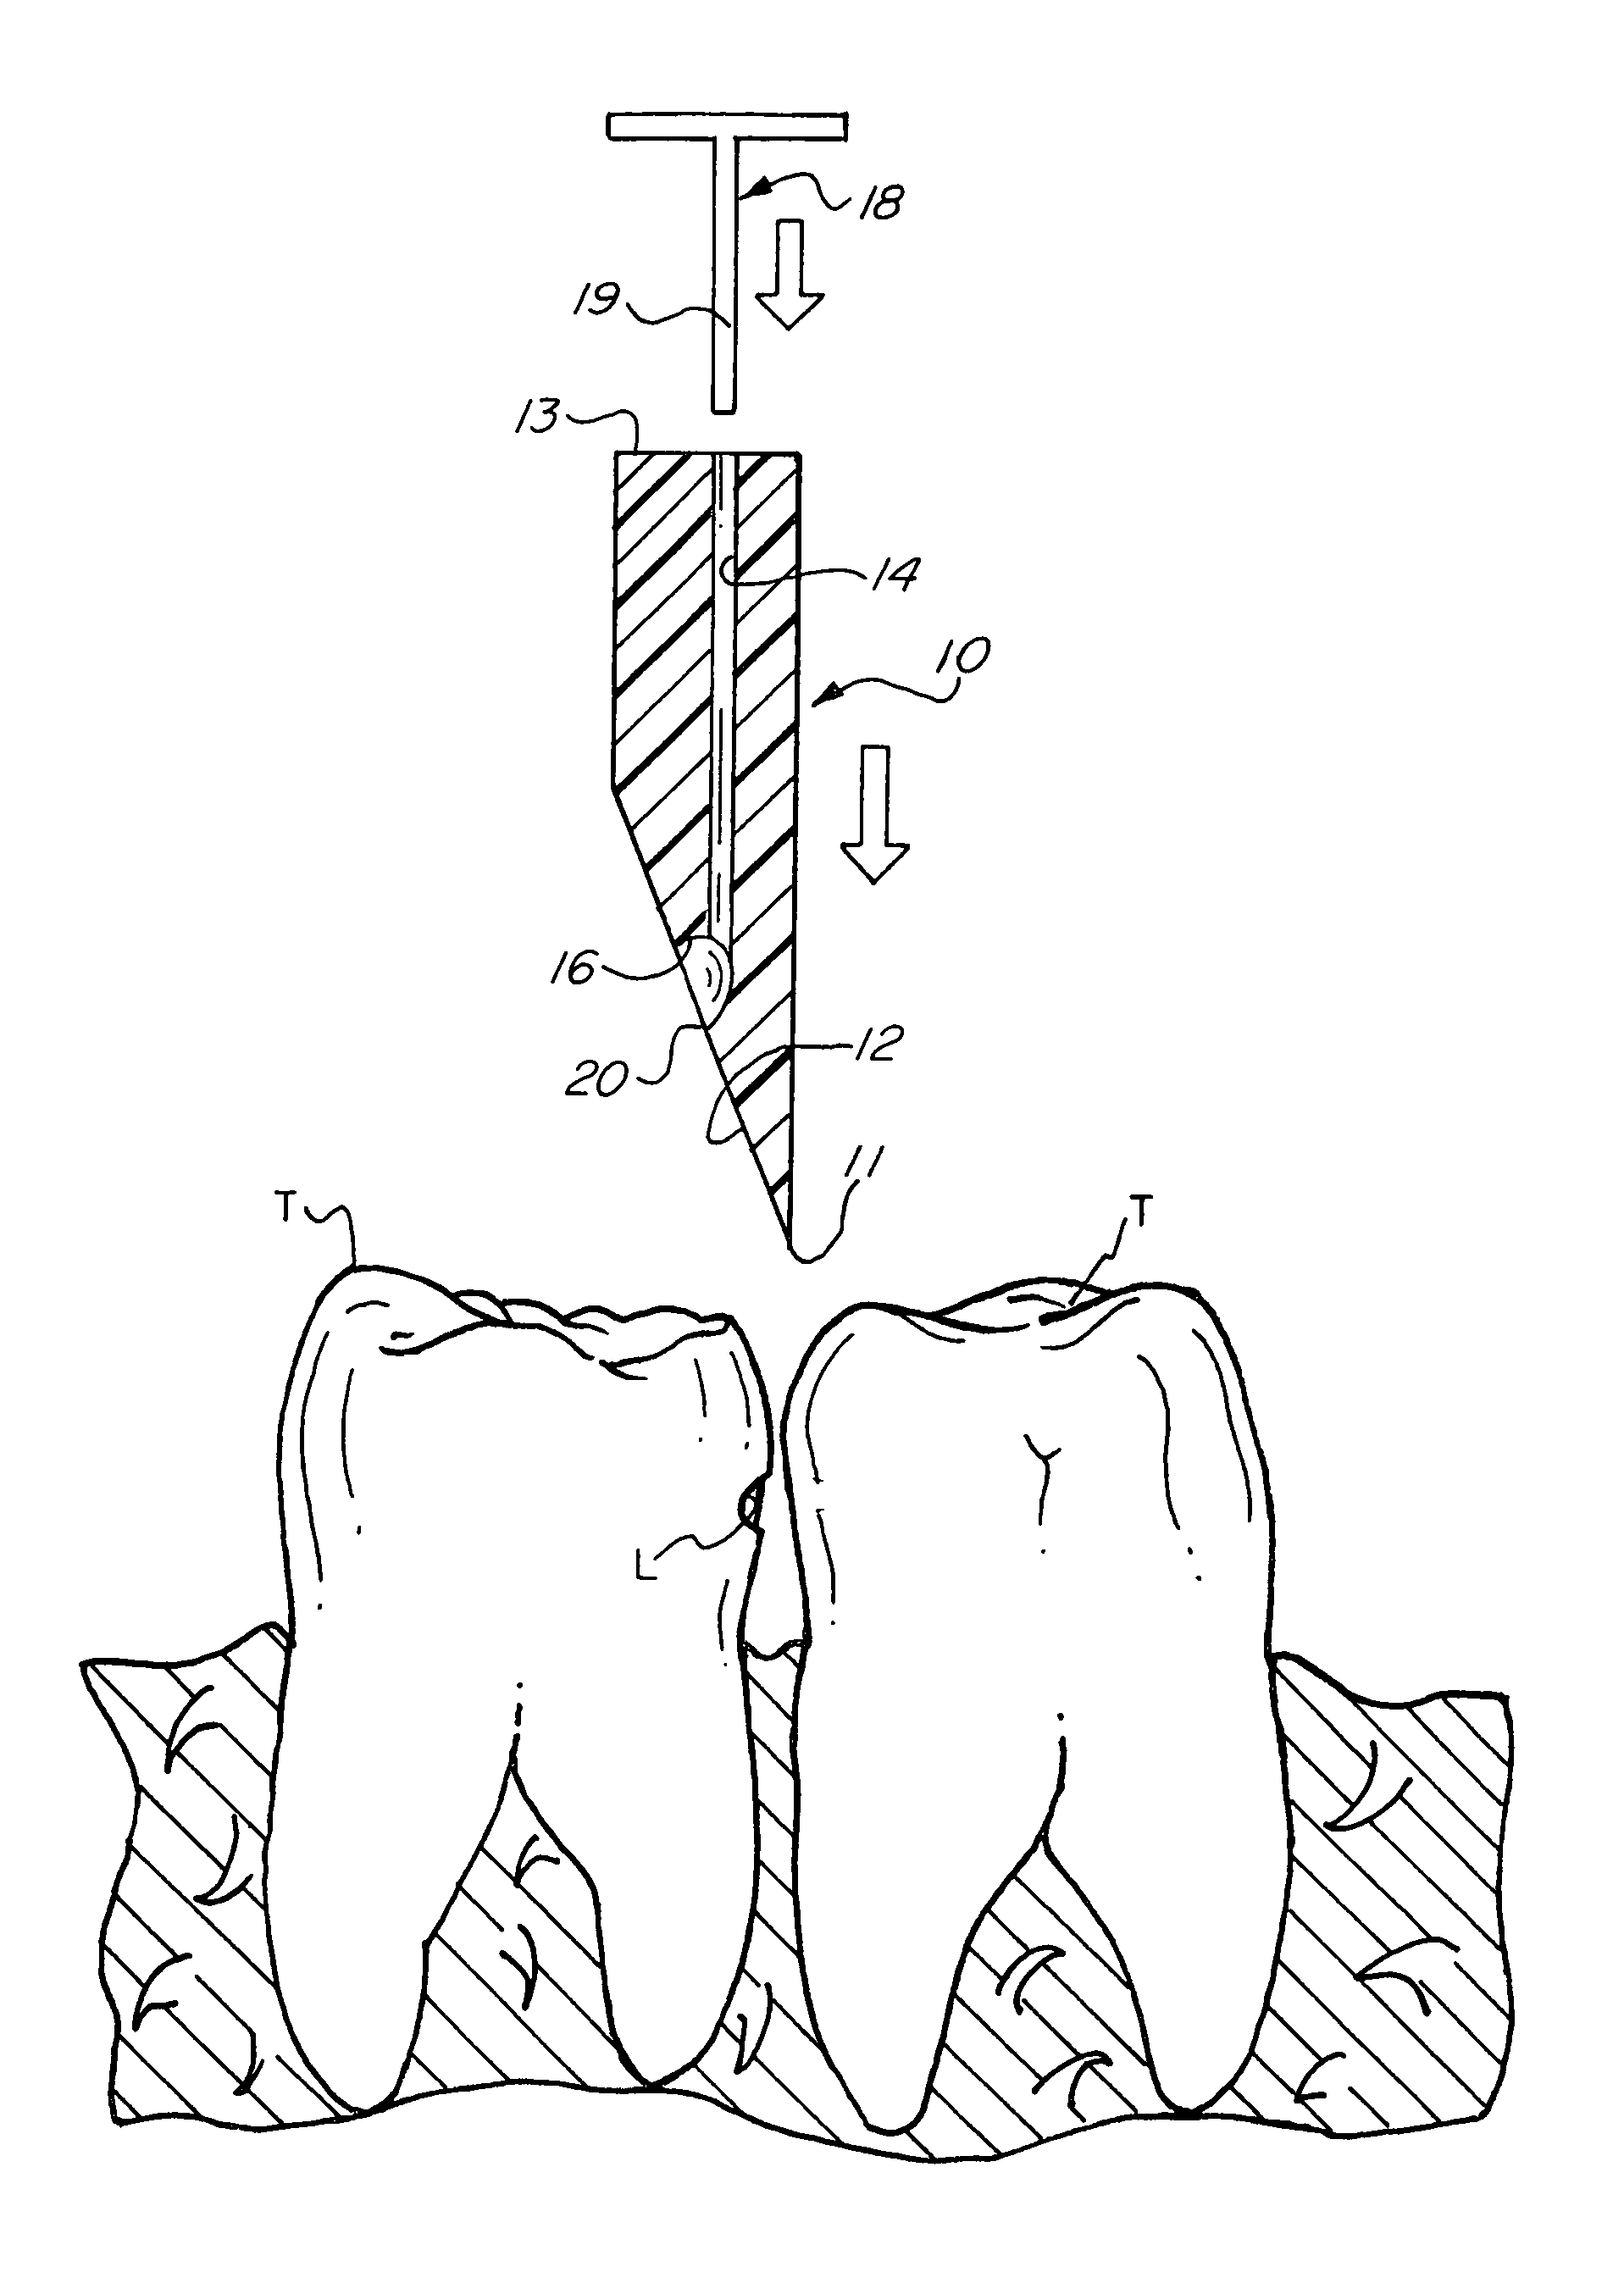 Interproximal non-surgical caries treatment device and method